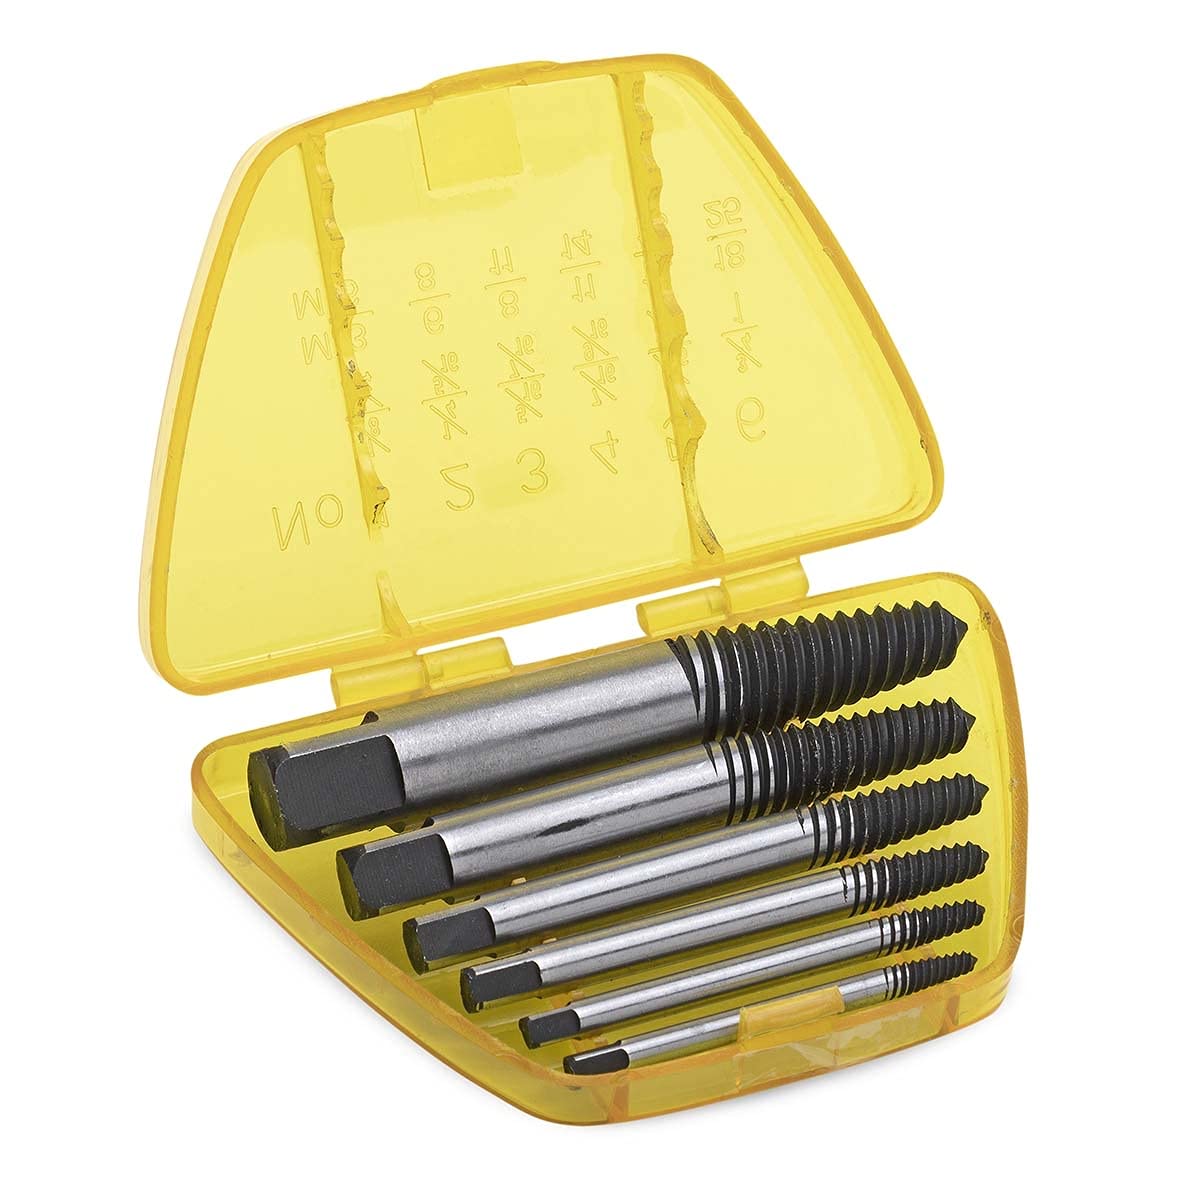 Eastwood 6 Piece Screw Extractor Set Made Of High Strength Chrom-Molybdenum Steel